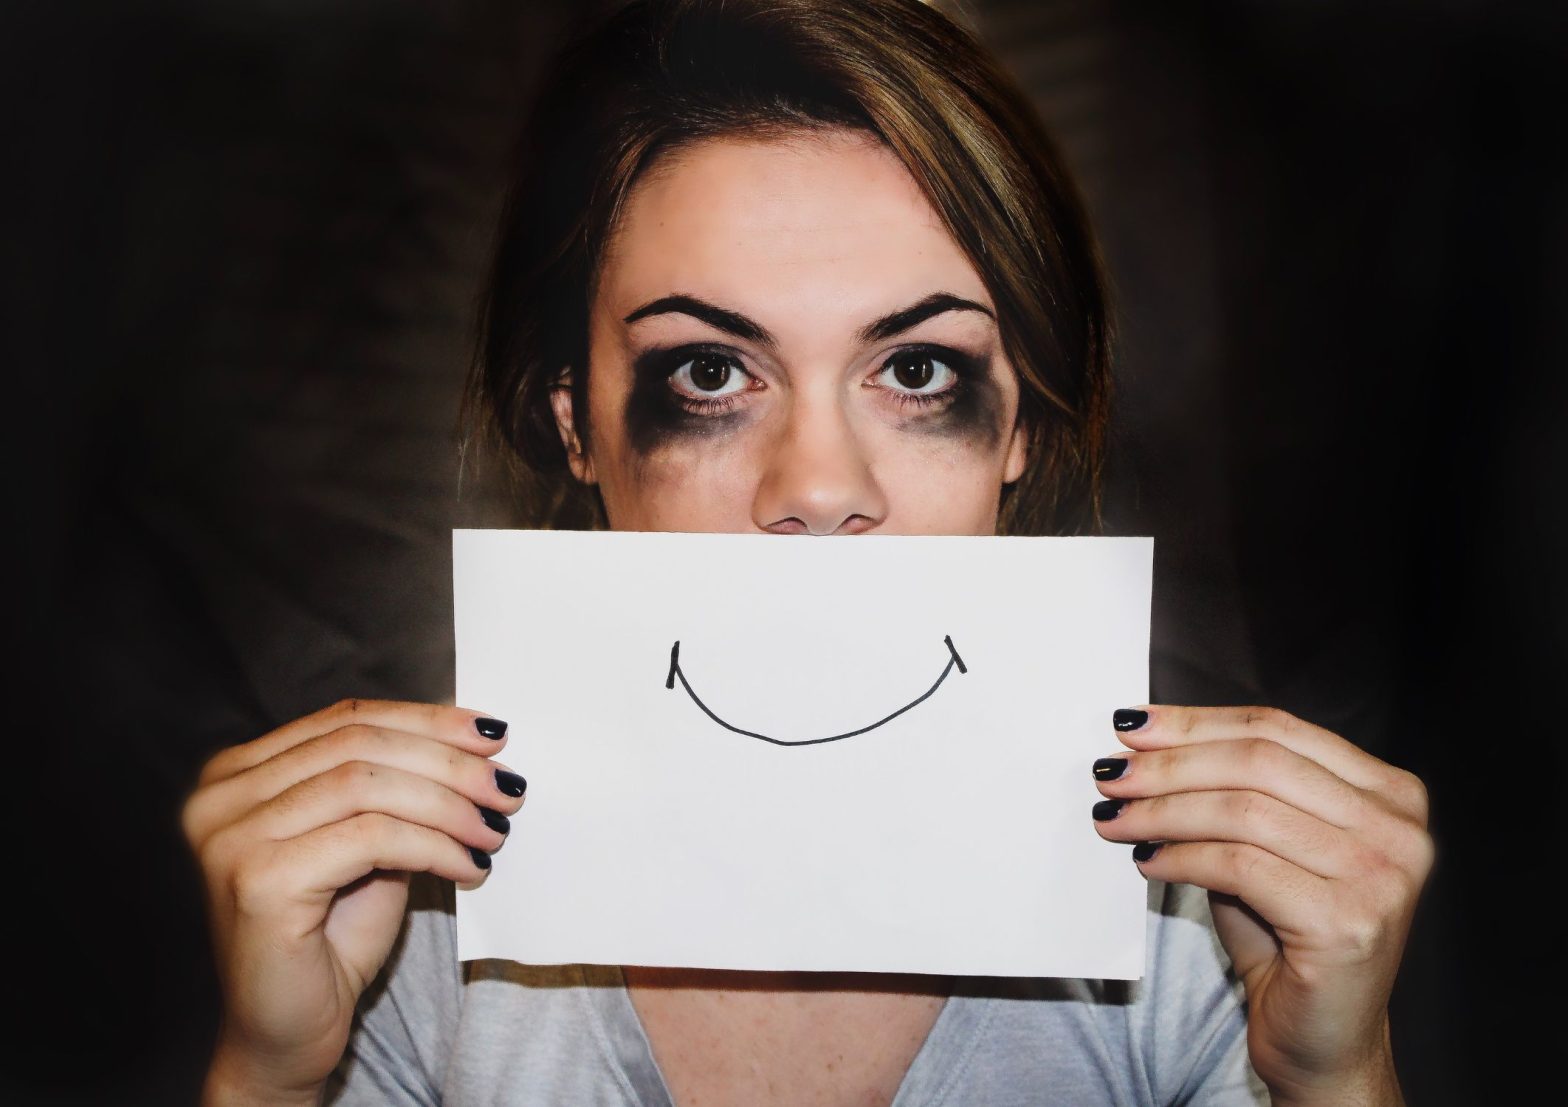 Image shows a person who looks like they've been crying but who is holding a piece of paper over their mouth with a smile drawn on it